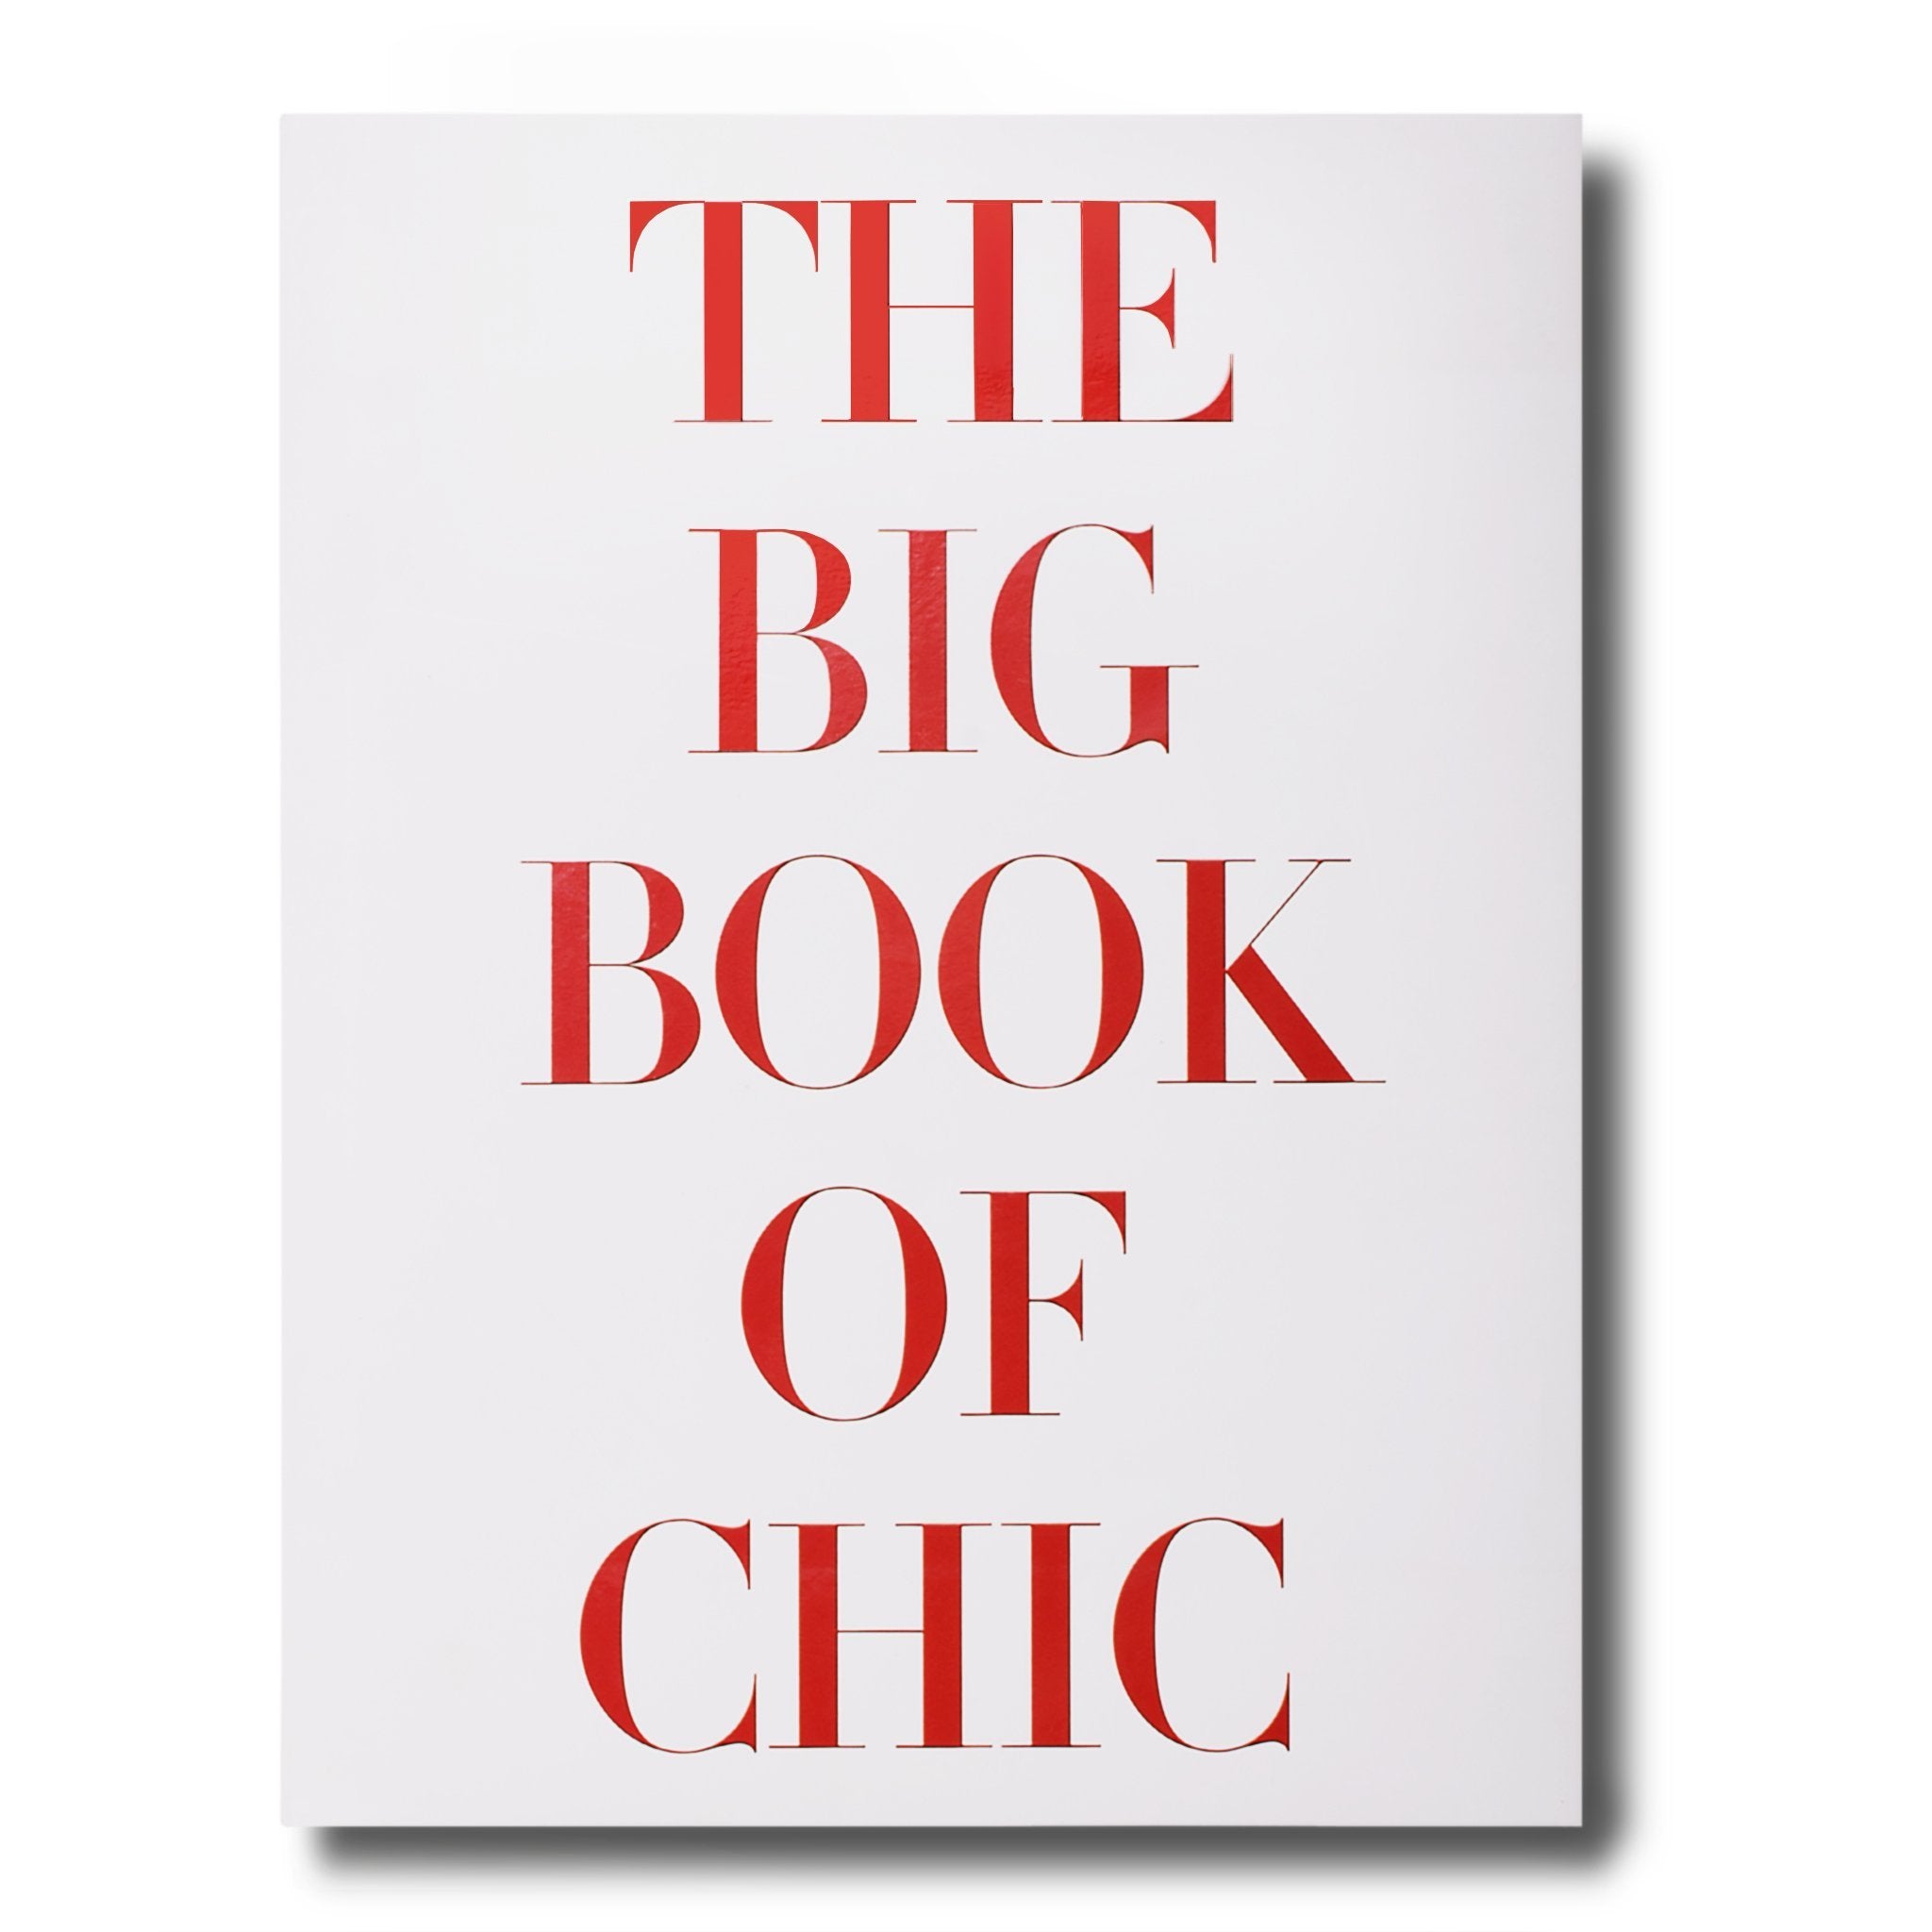 The Book; The Big Book of Chic 